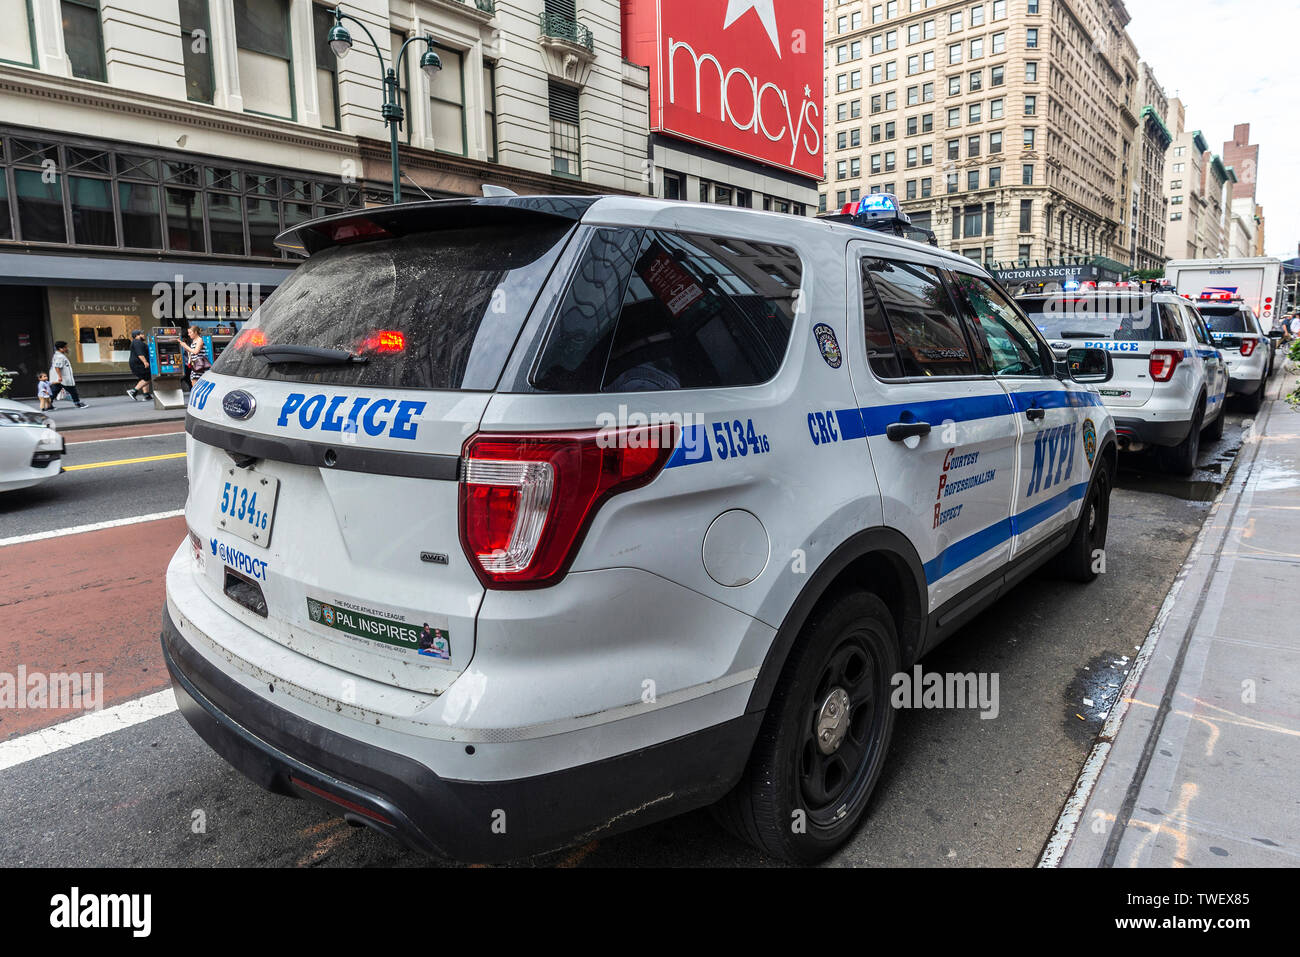 New York City, USA - July 31, 2018: Police car parked on a street in front of Macys department store with people around in Manhattan, New York City, U Stock Photo